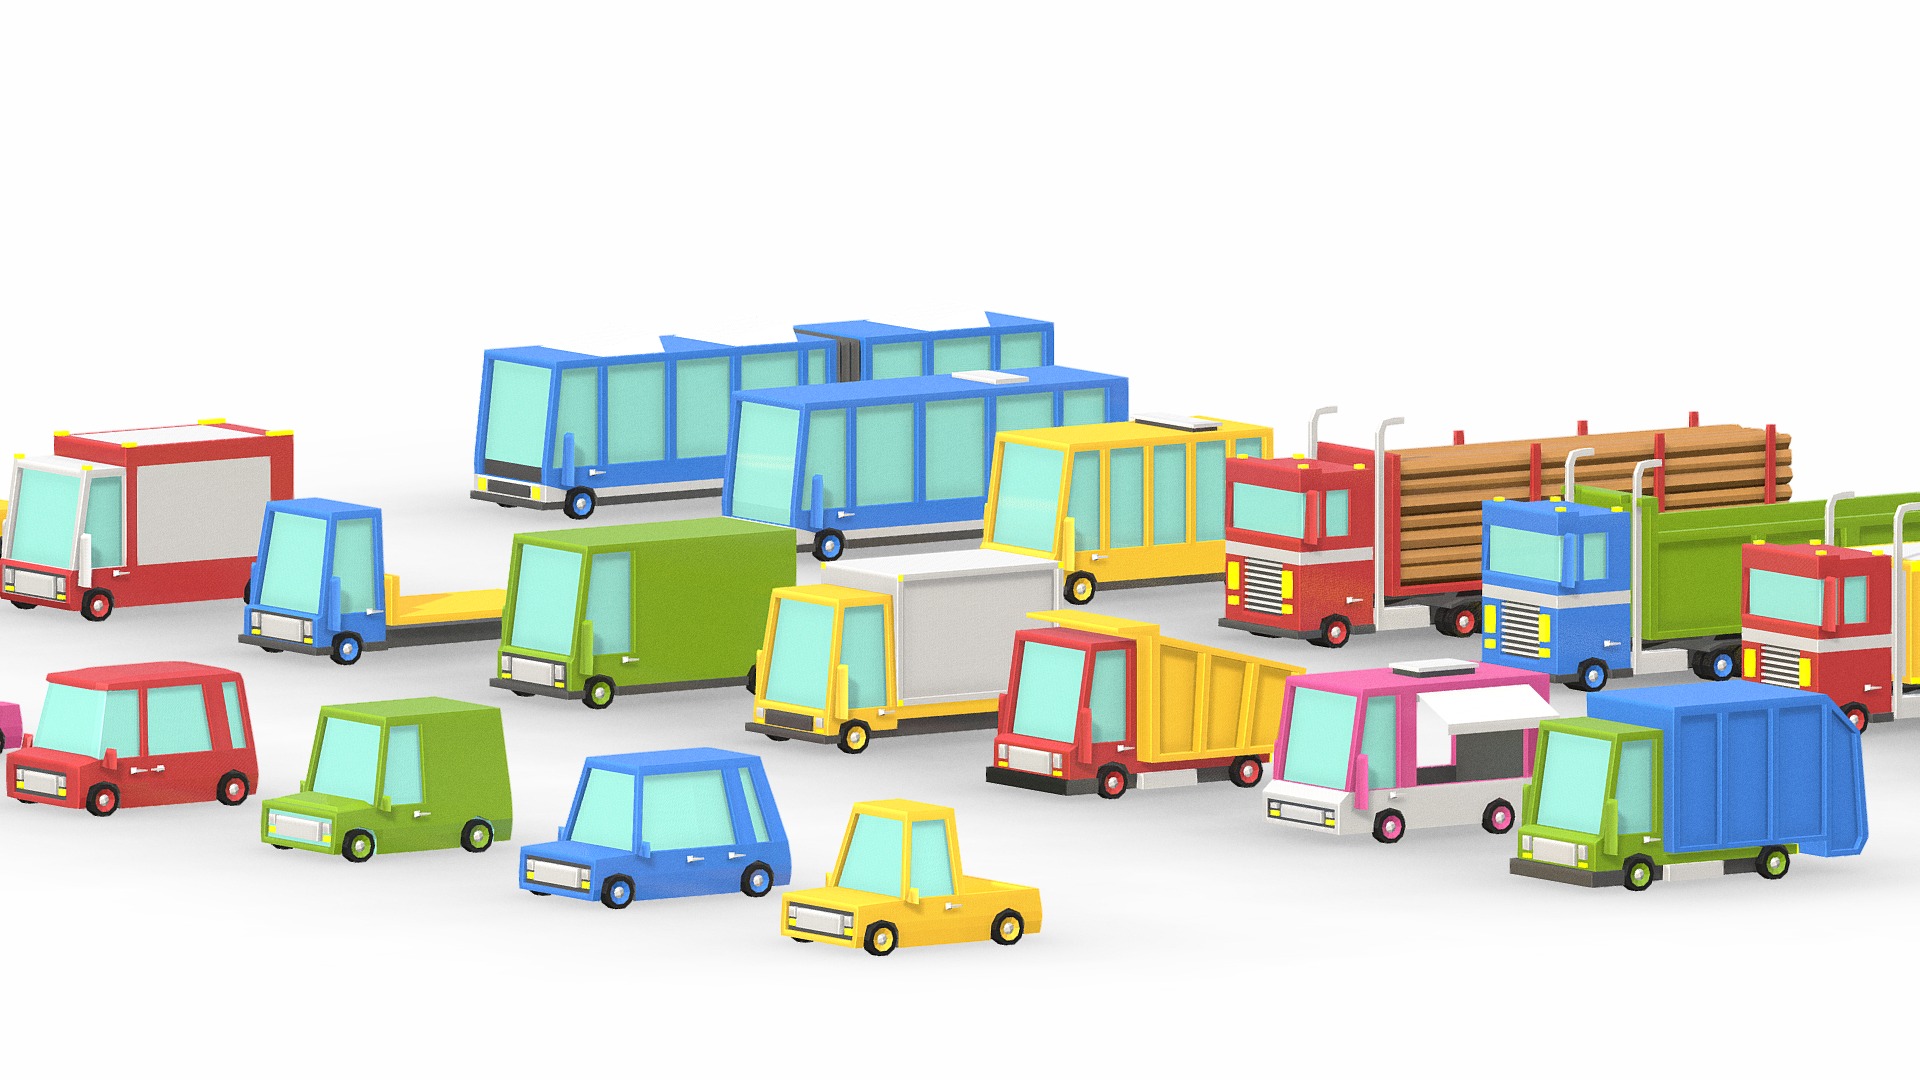 3D model Low Poly Cartoon City Cars - This is a 3D model of the Low Poly Cartoon City Cars. The 3D model is about a group of toy trucks.